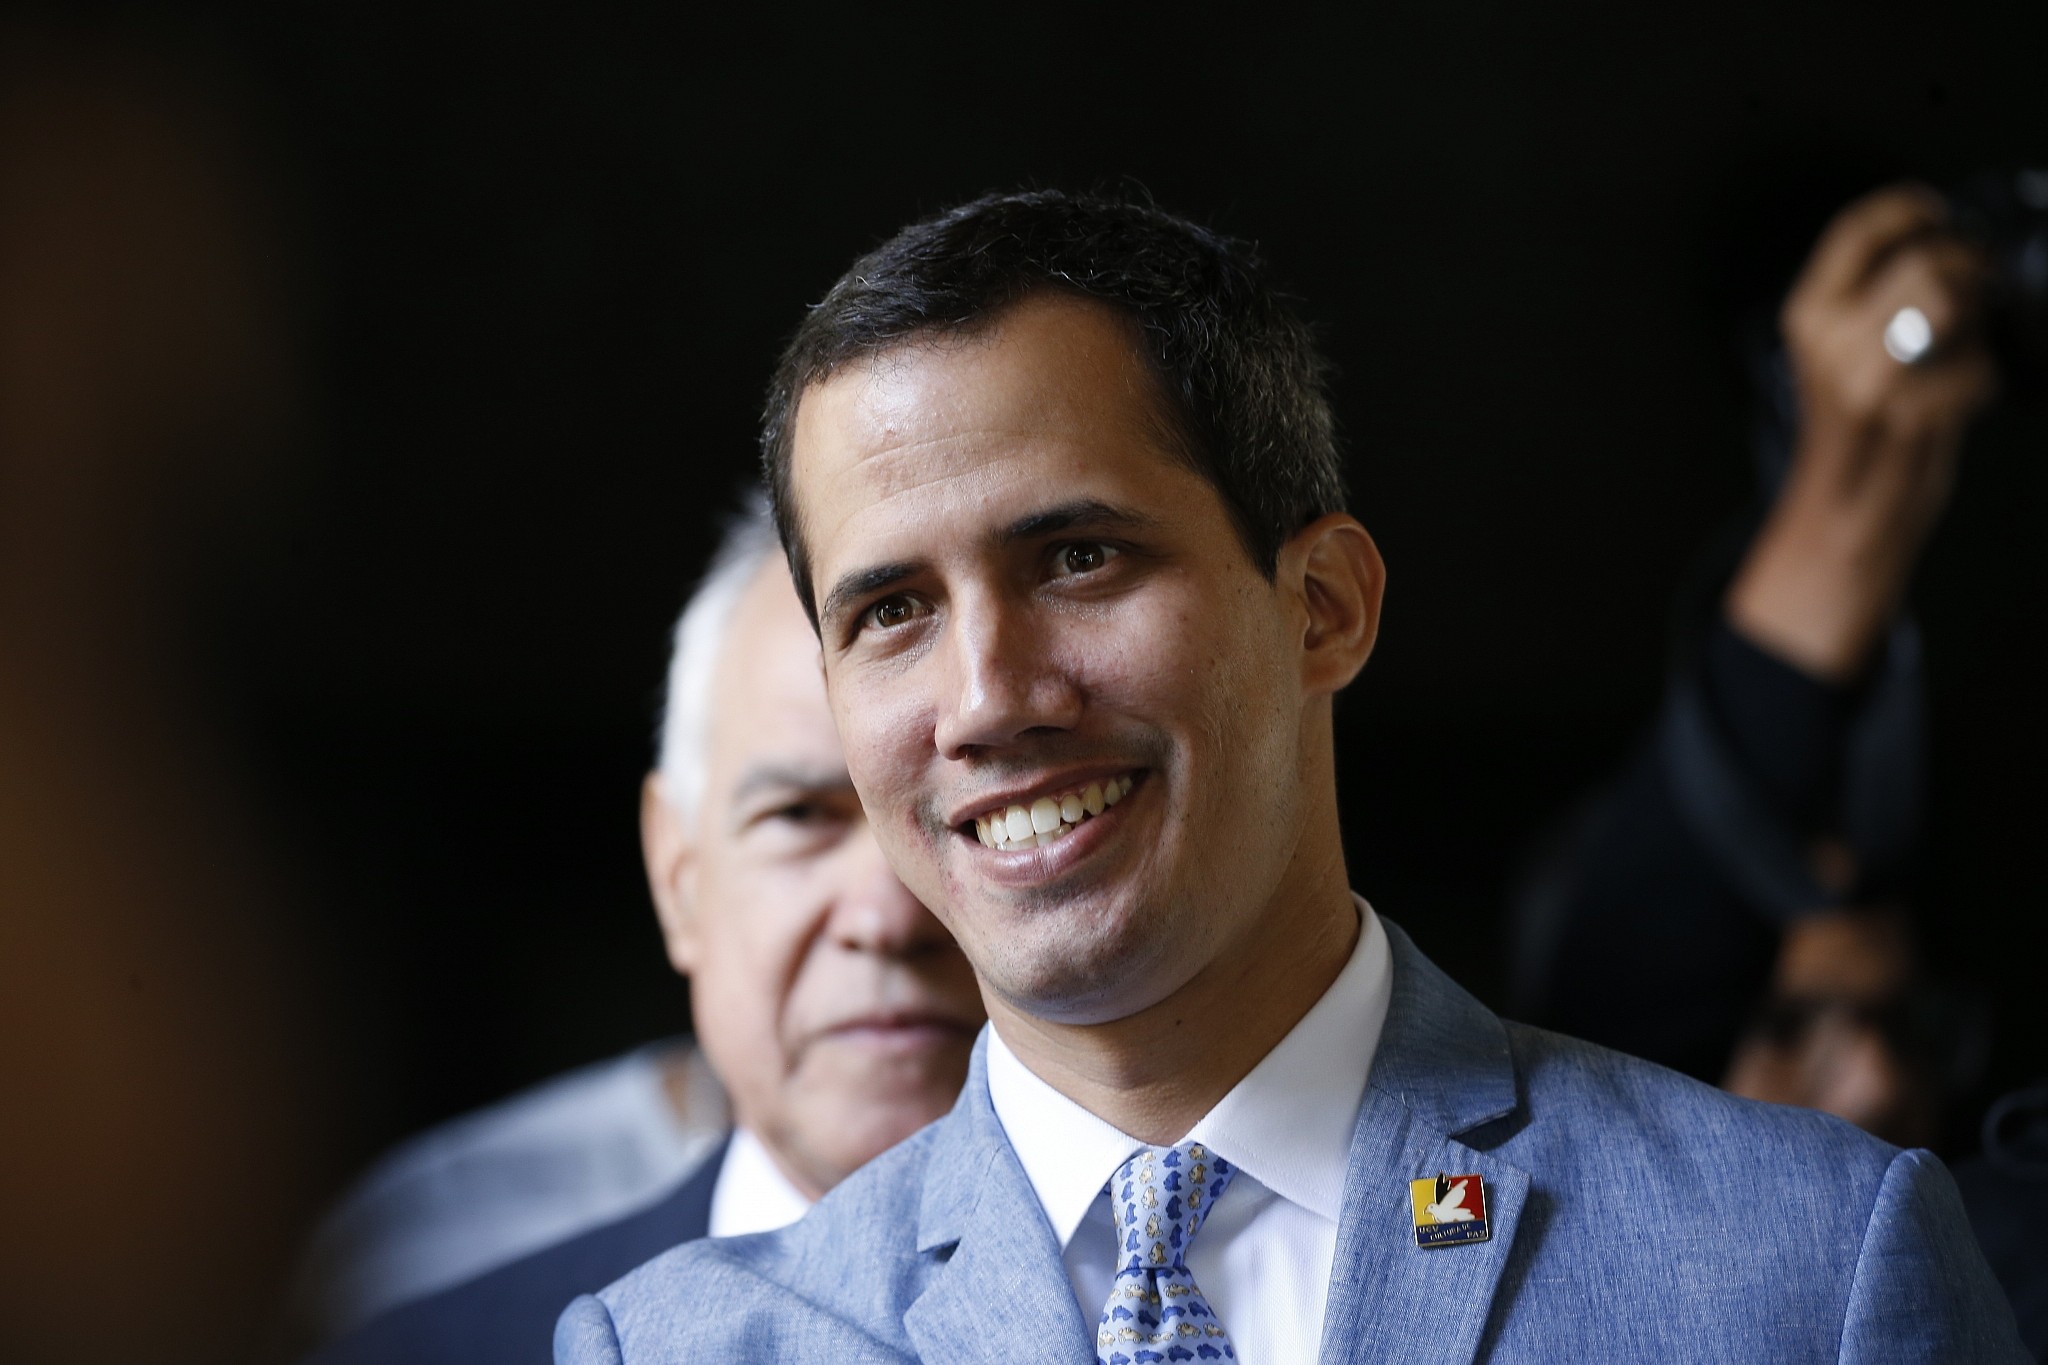 Venezuelan challenger Guaido says he's working to renew ties with Israel | The Times of Israel